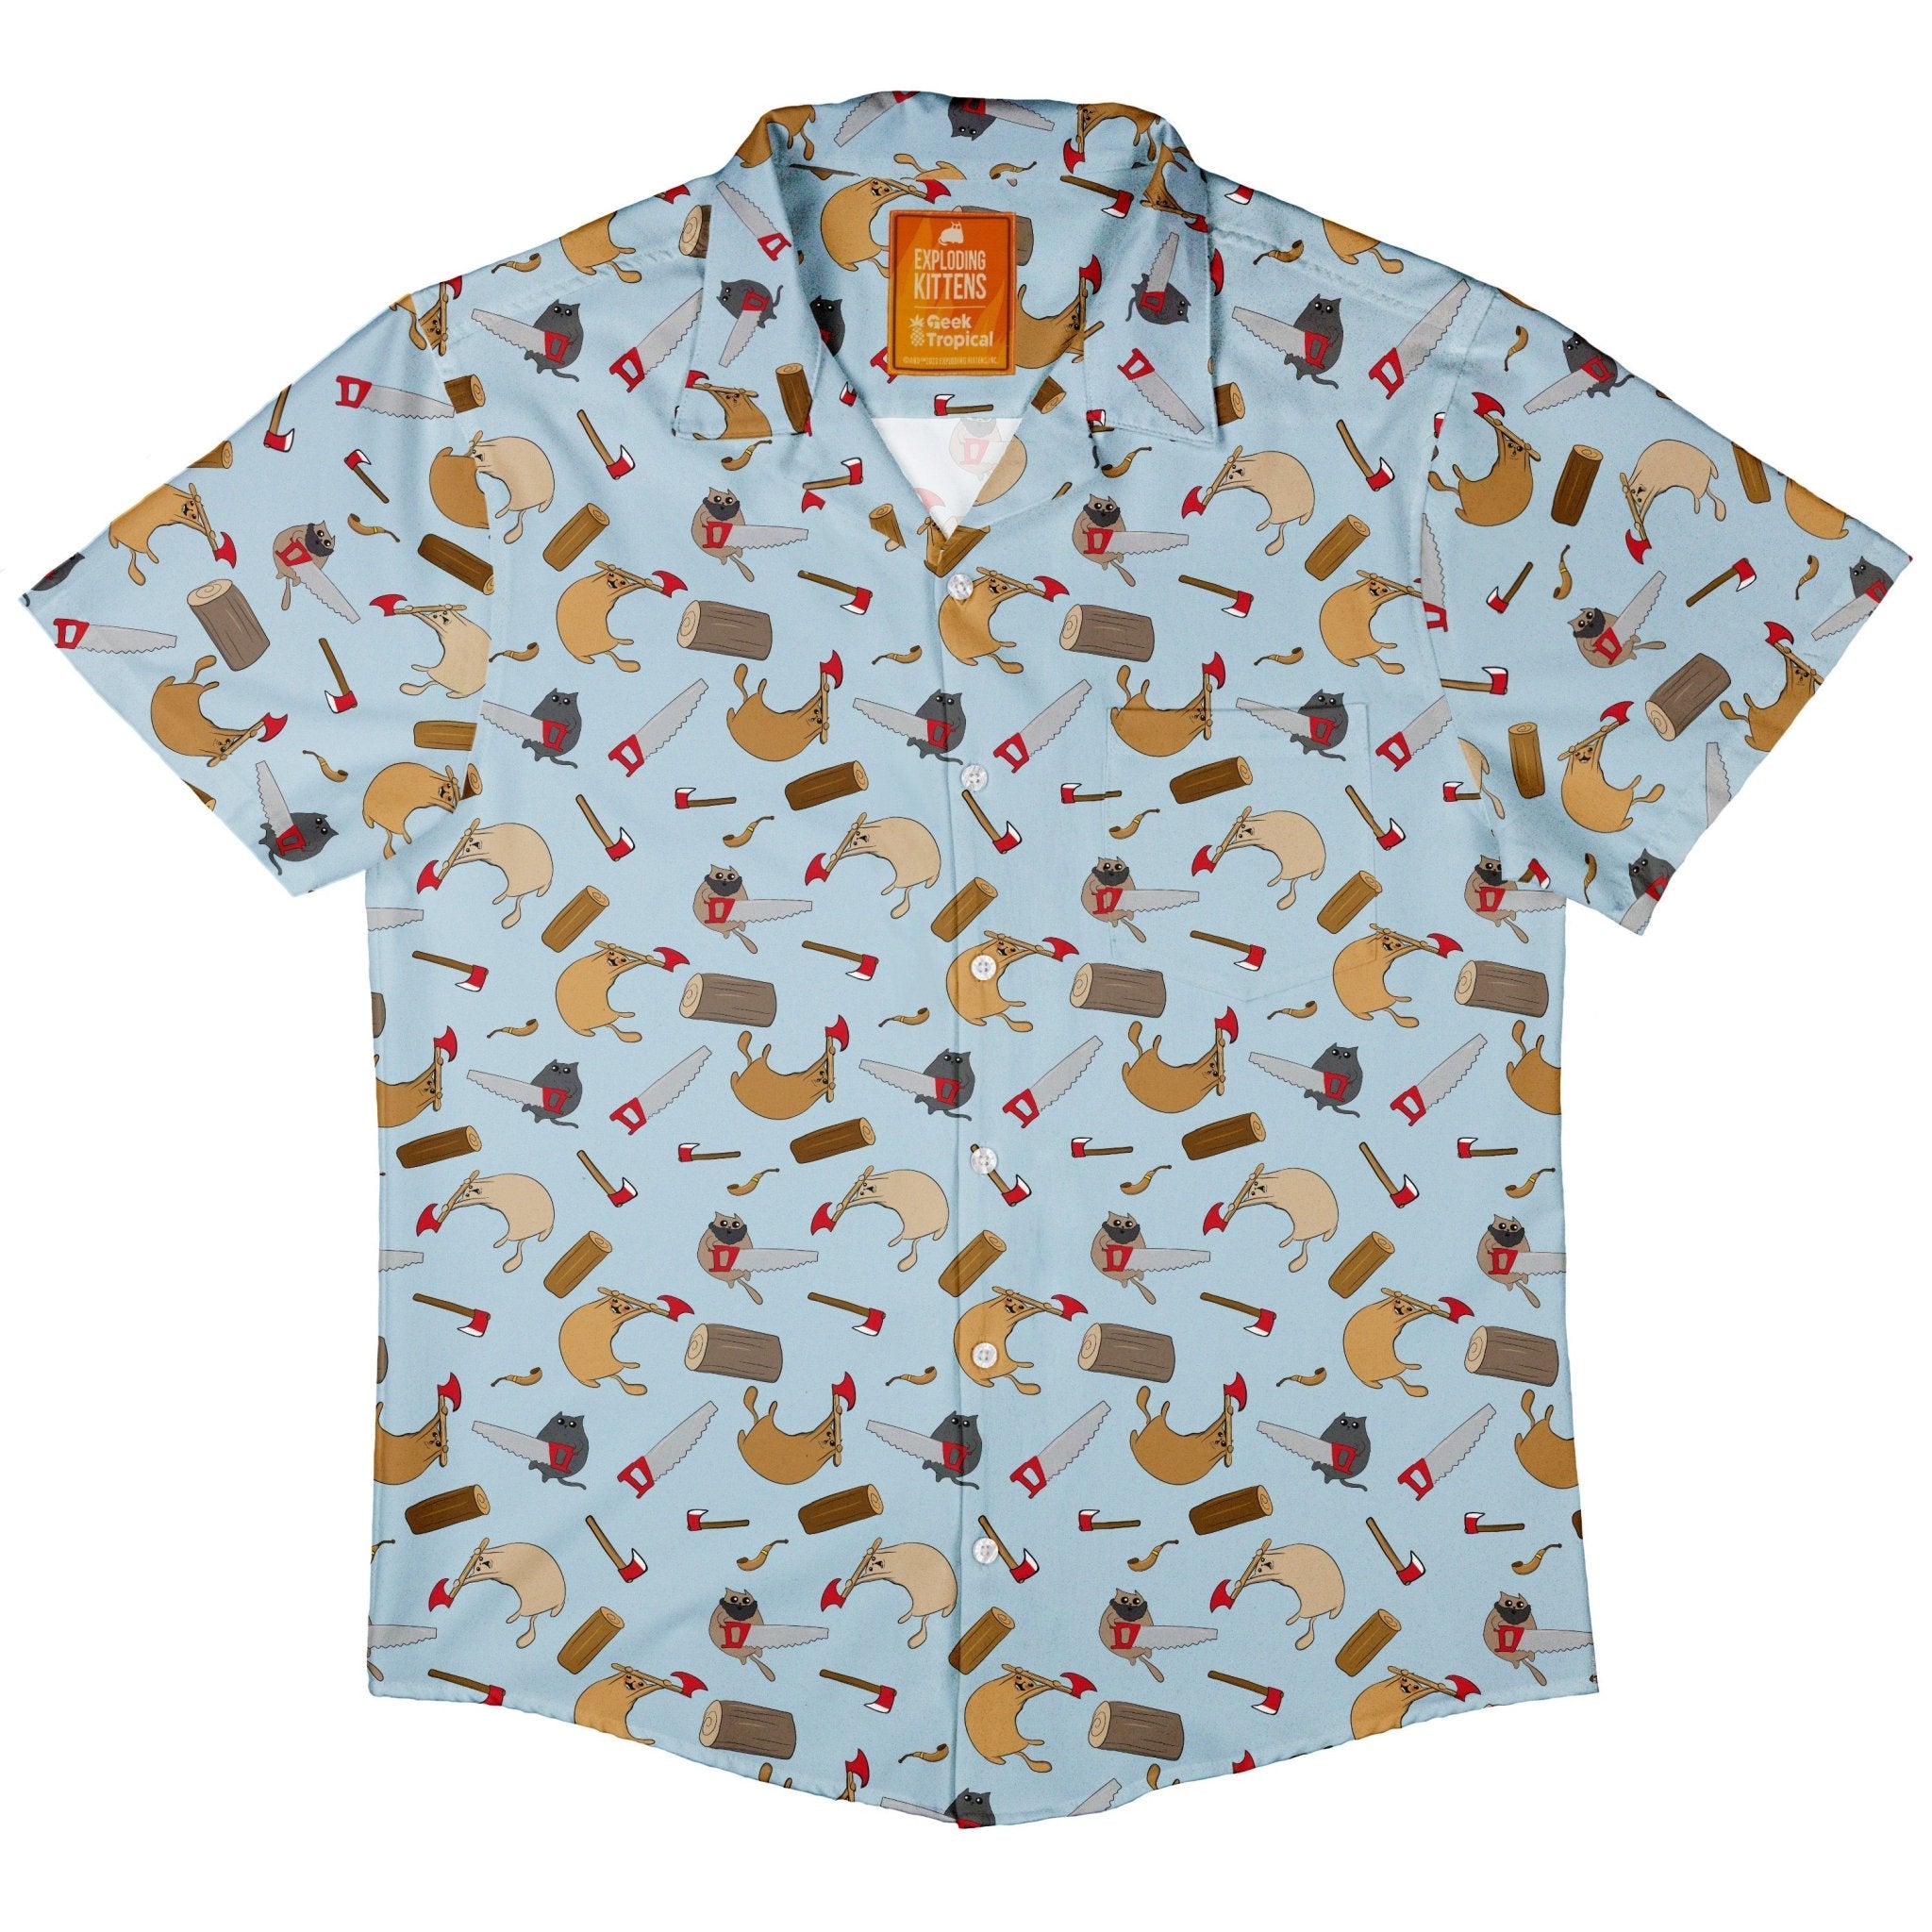 Exploding Kittens Lumber Cats Button Up Shirt - adult sizing - Animal Patterns - board game print